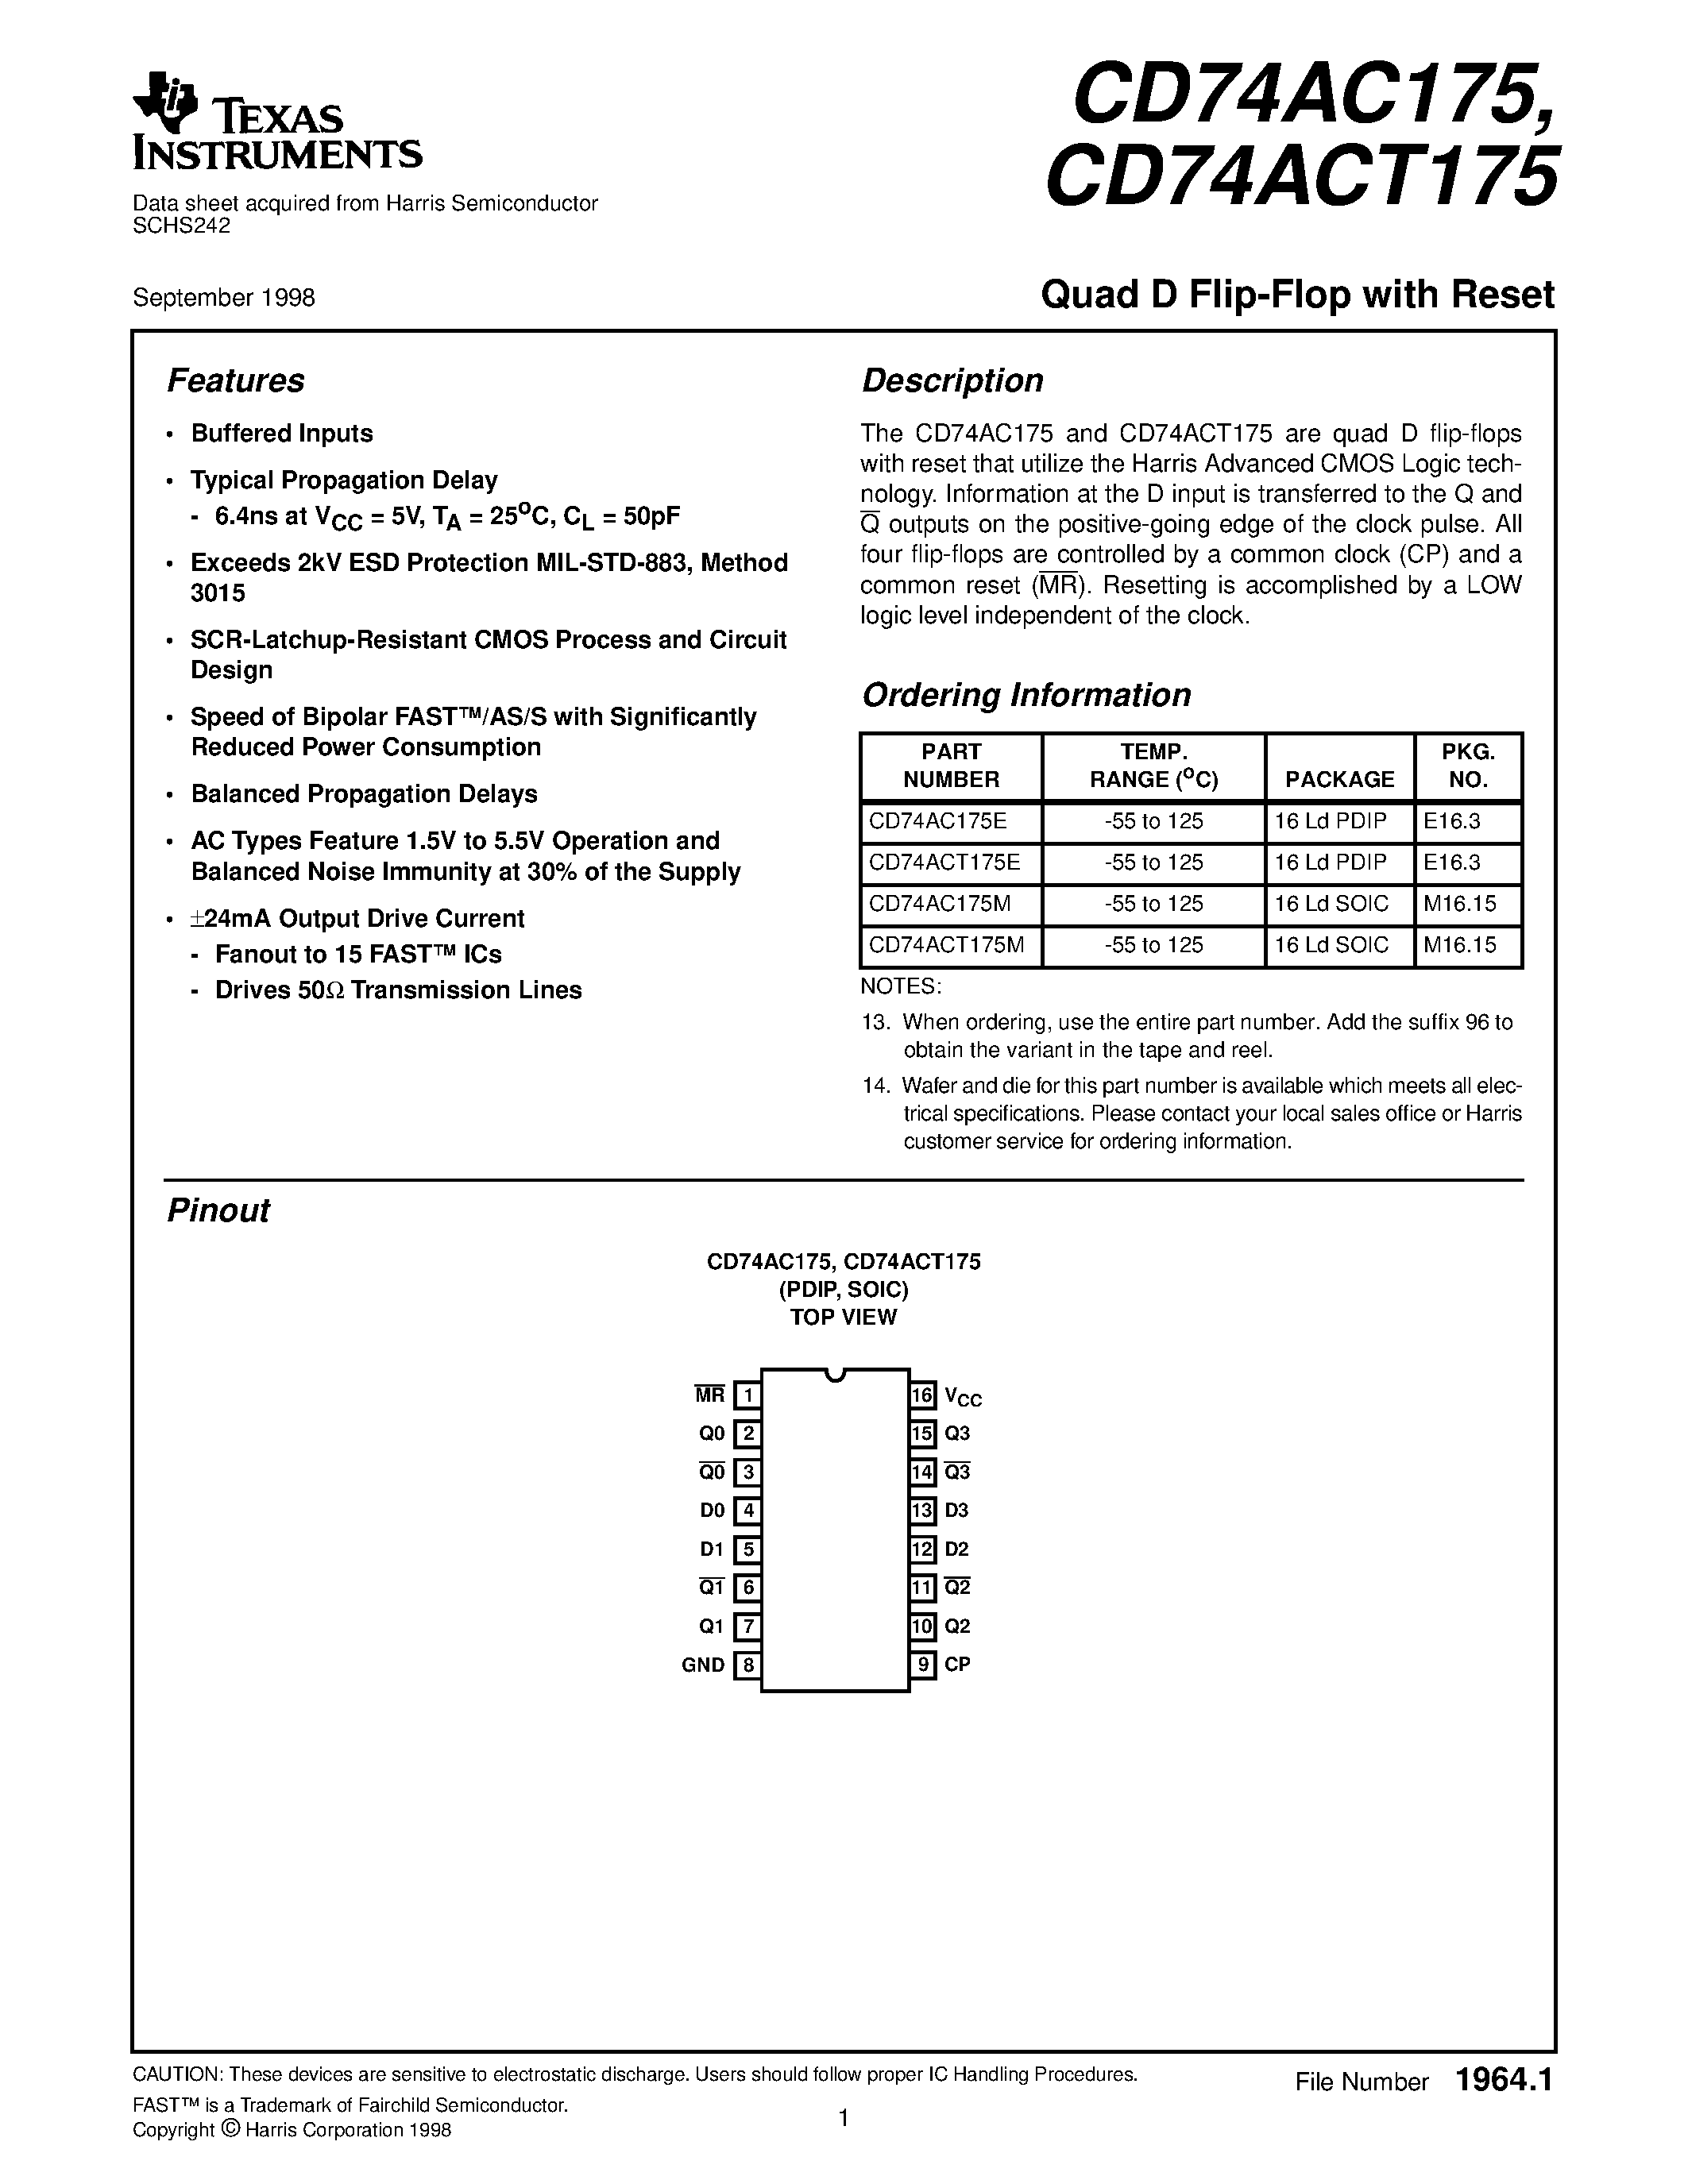 Datasheet 74AC175 - QUAD D FLIP-FLOP WITH MASTER RESET page 1